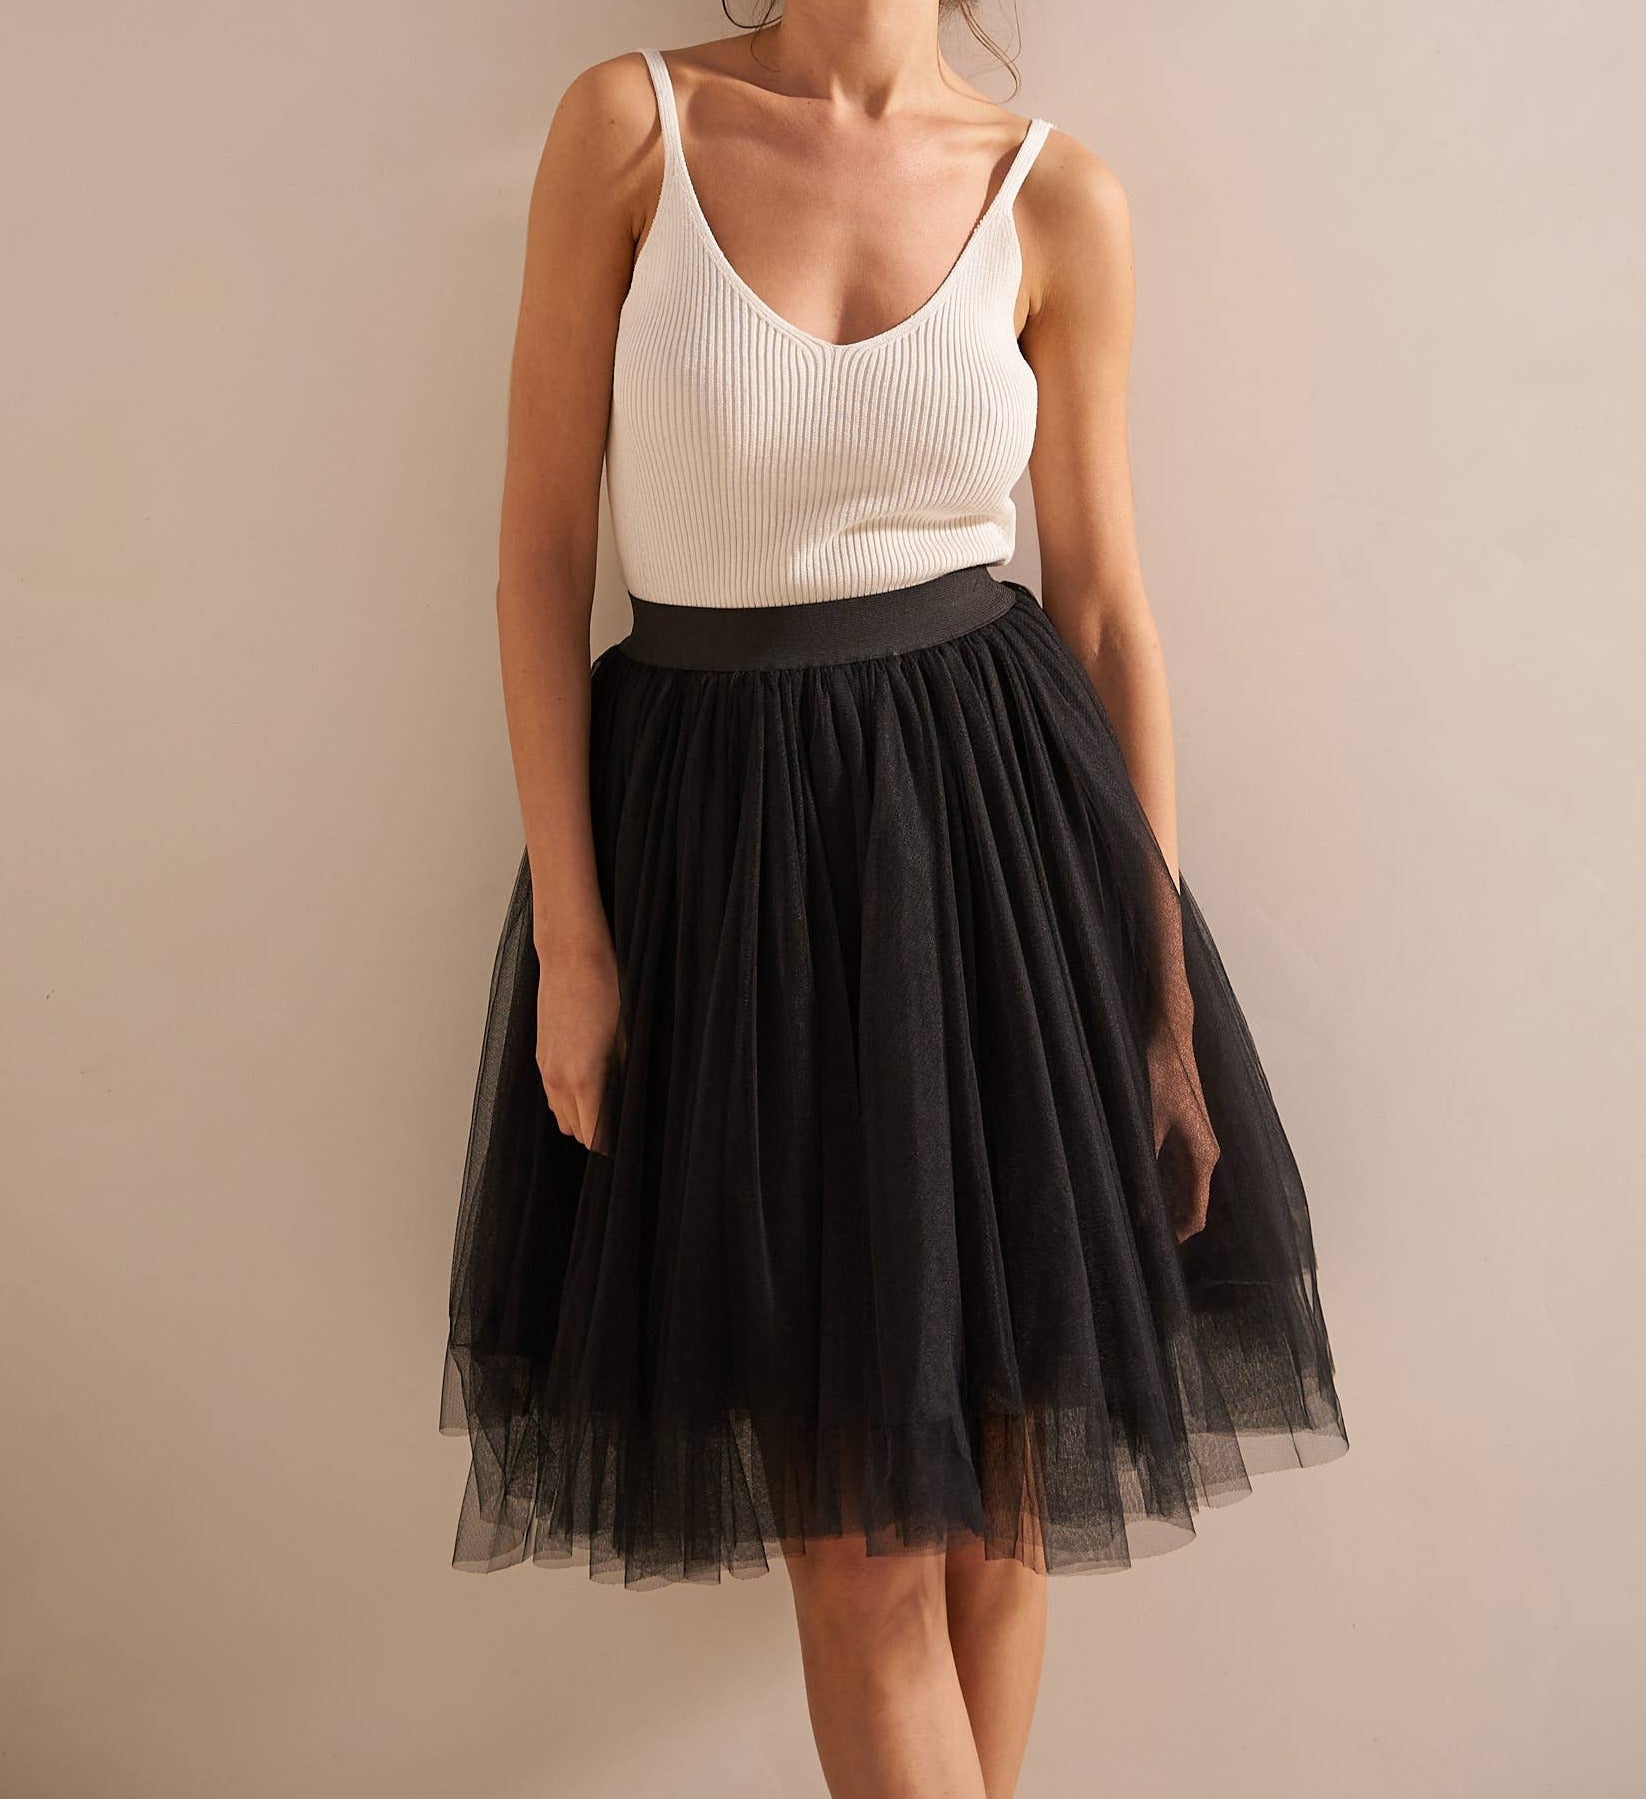 Tulle Tutu Skirt - Out of the Blue